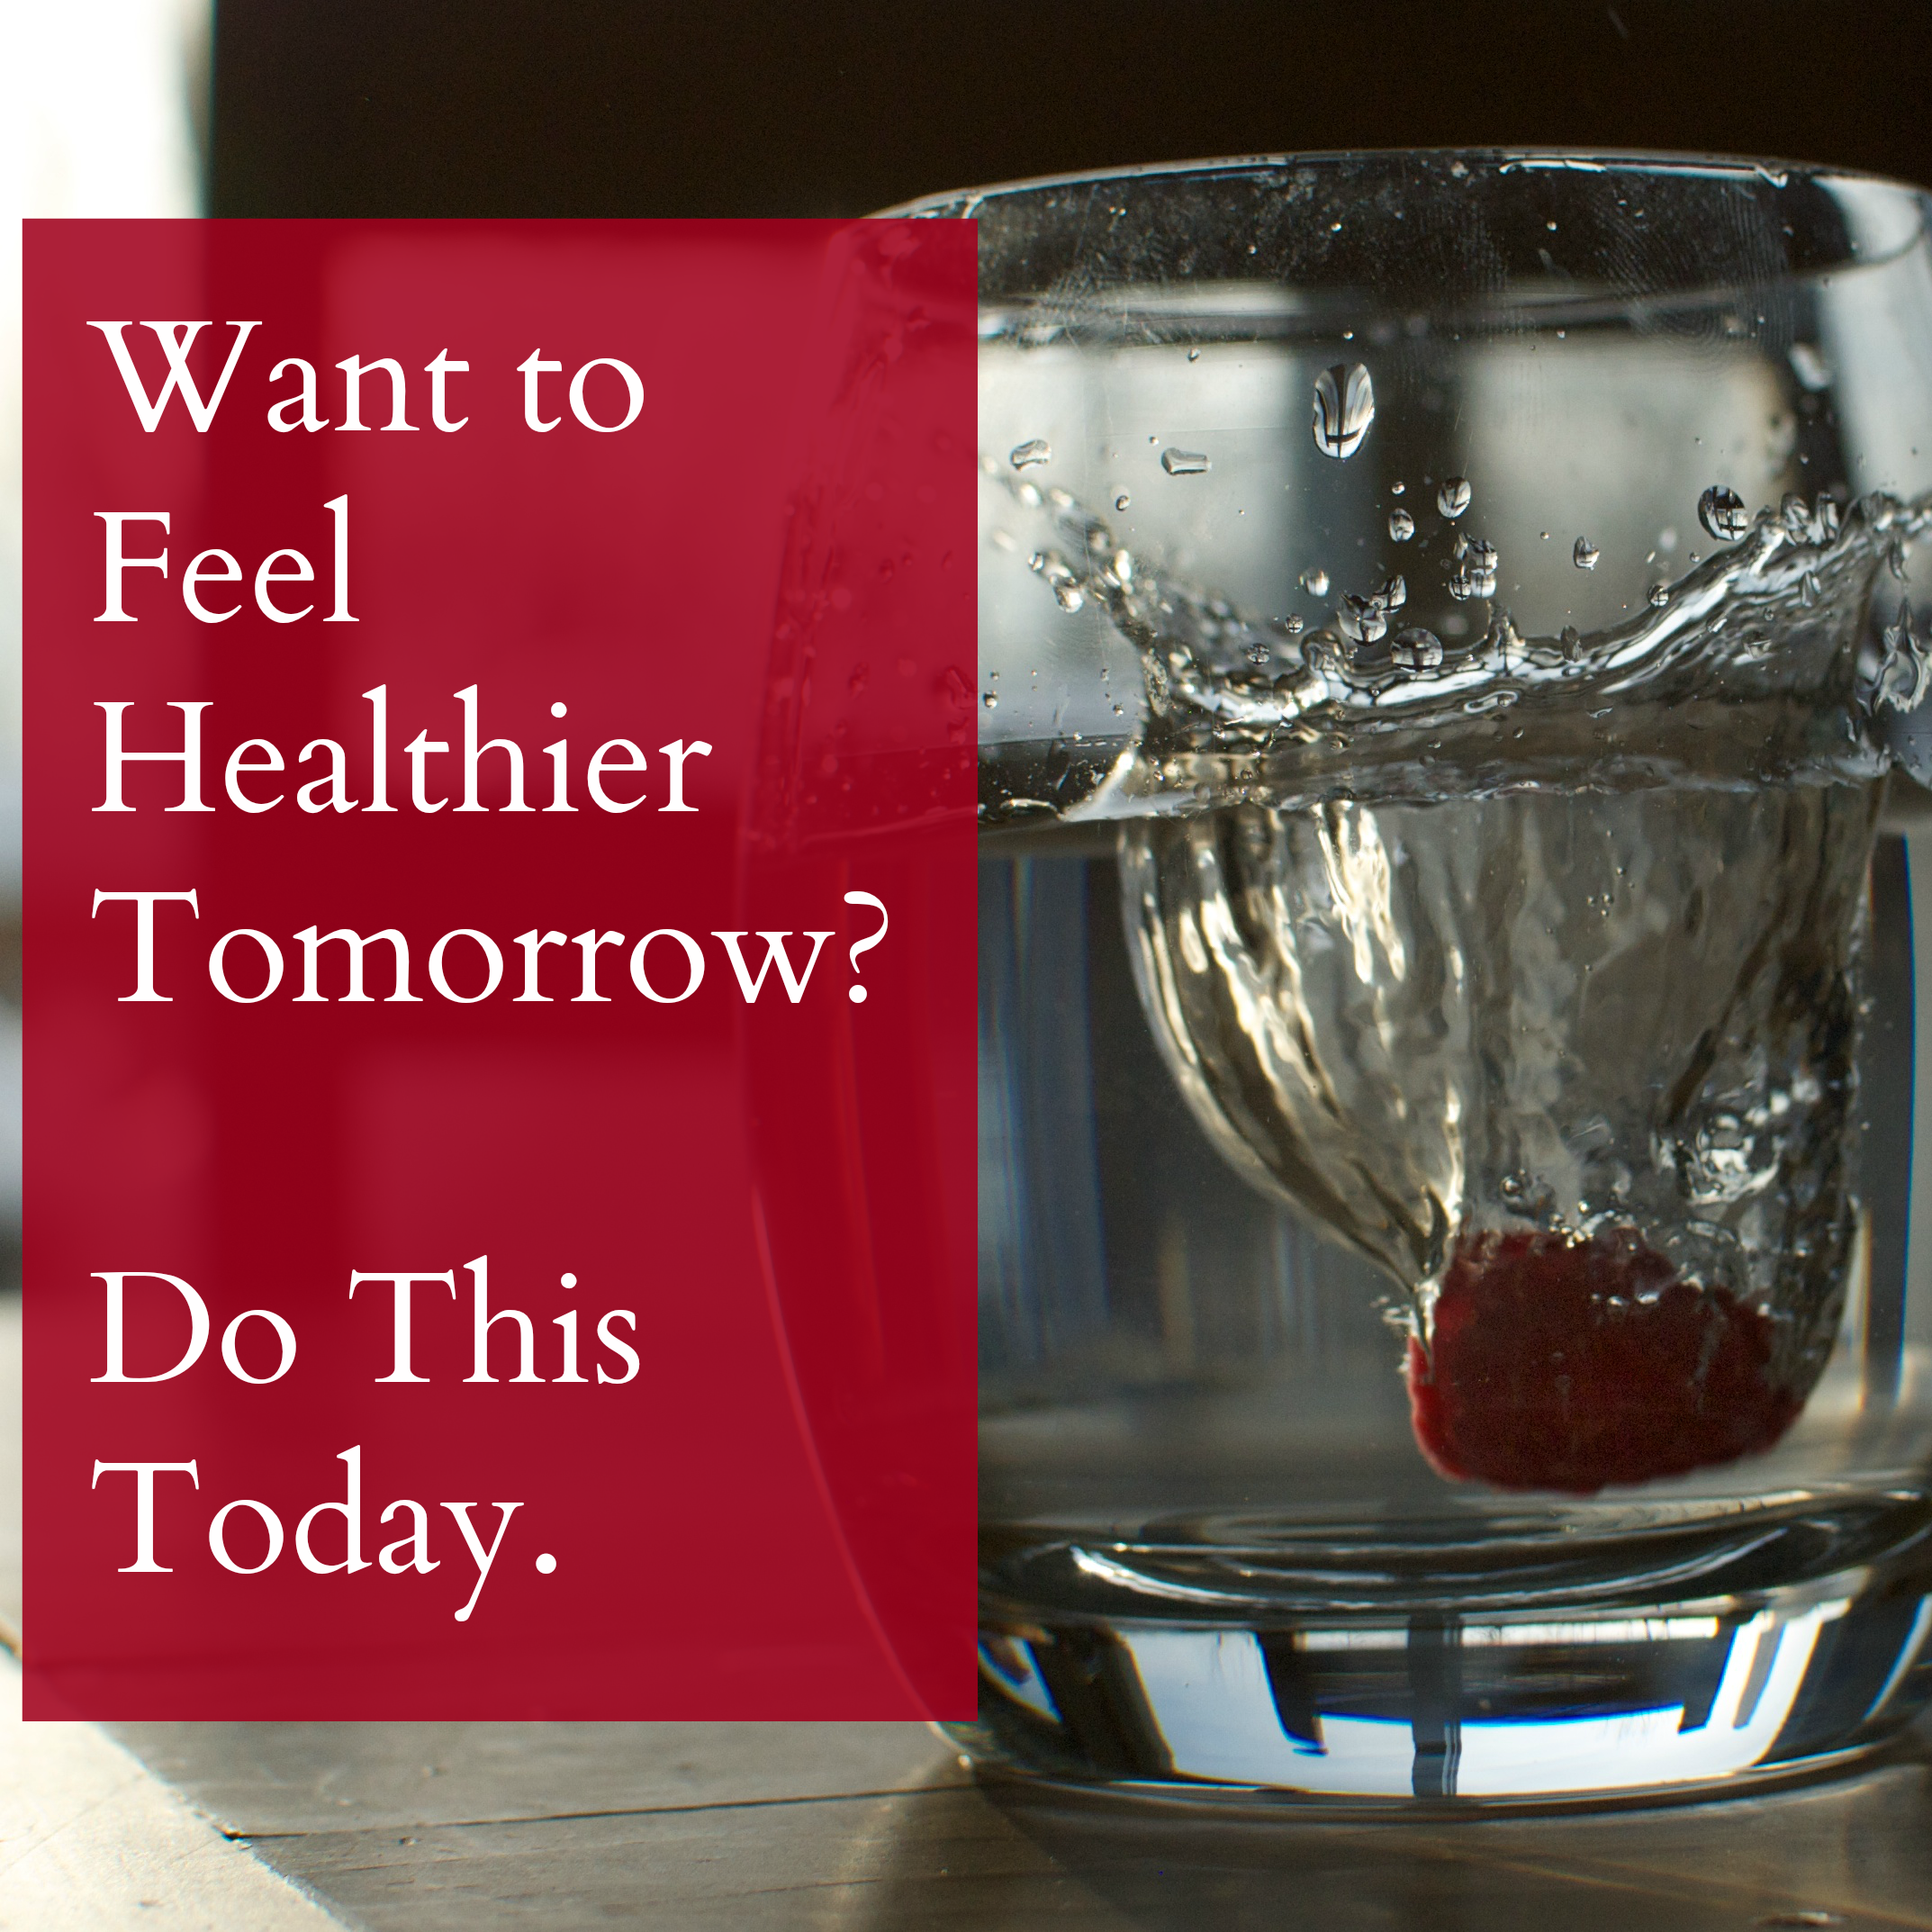 Want to Feel Healthier Tomorrow? Do This Today.